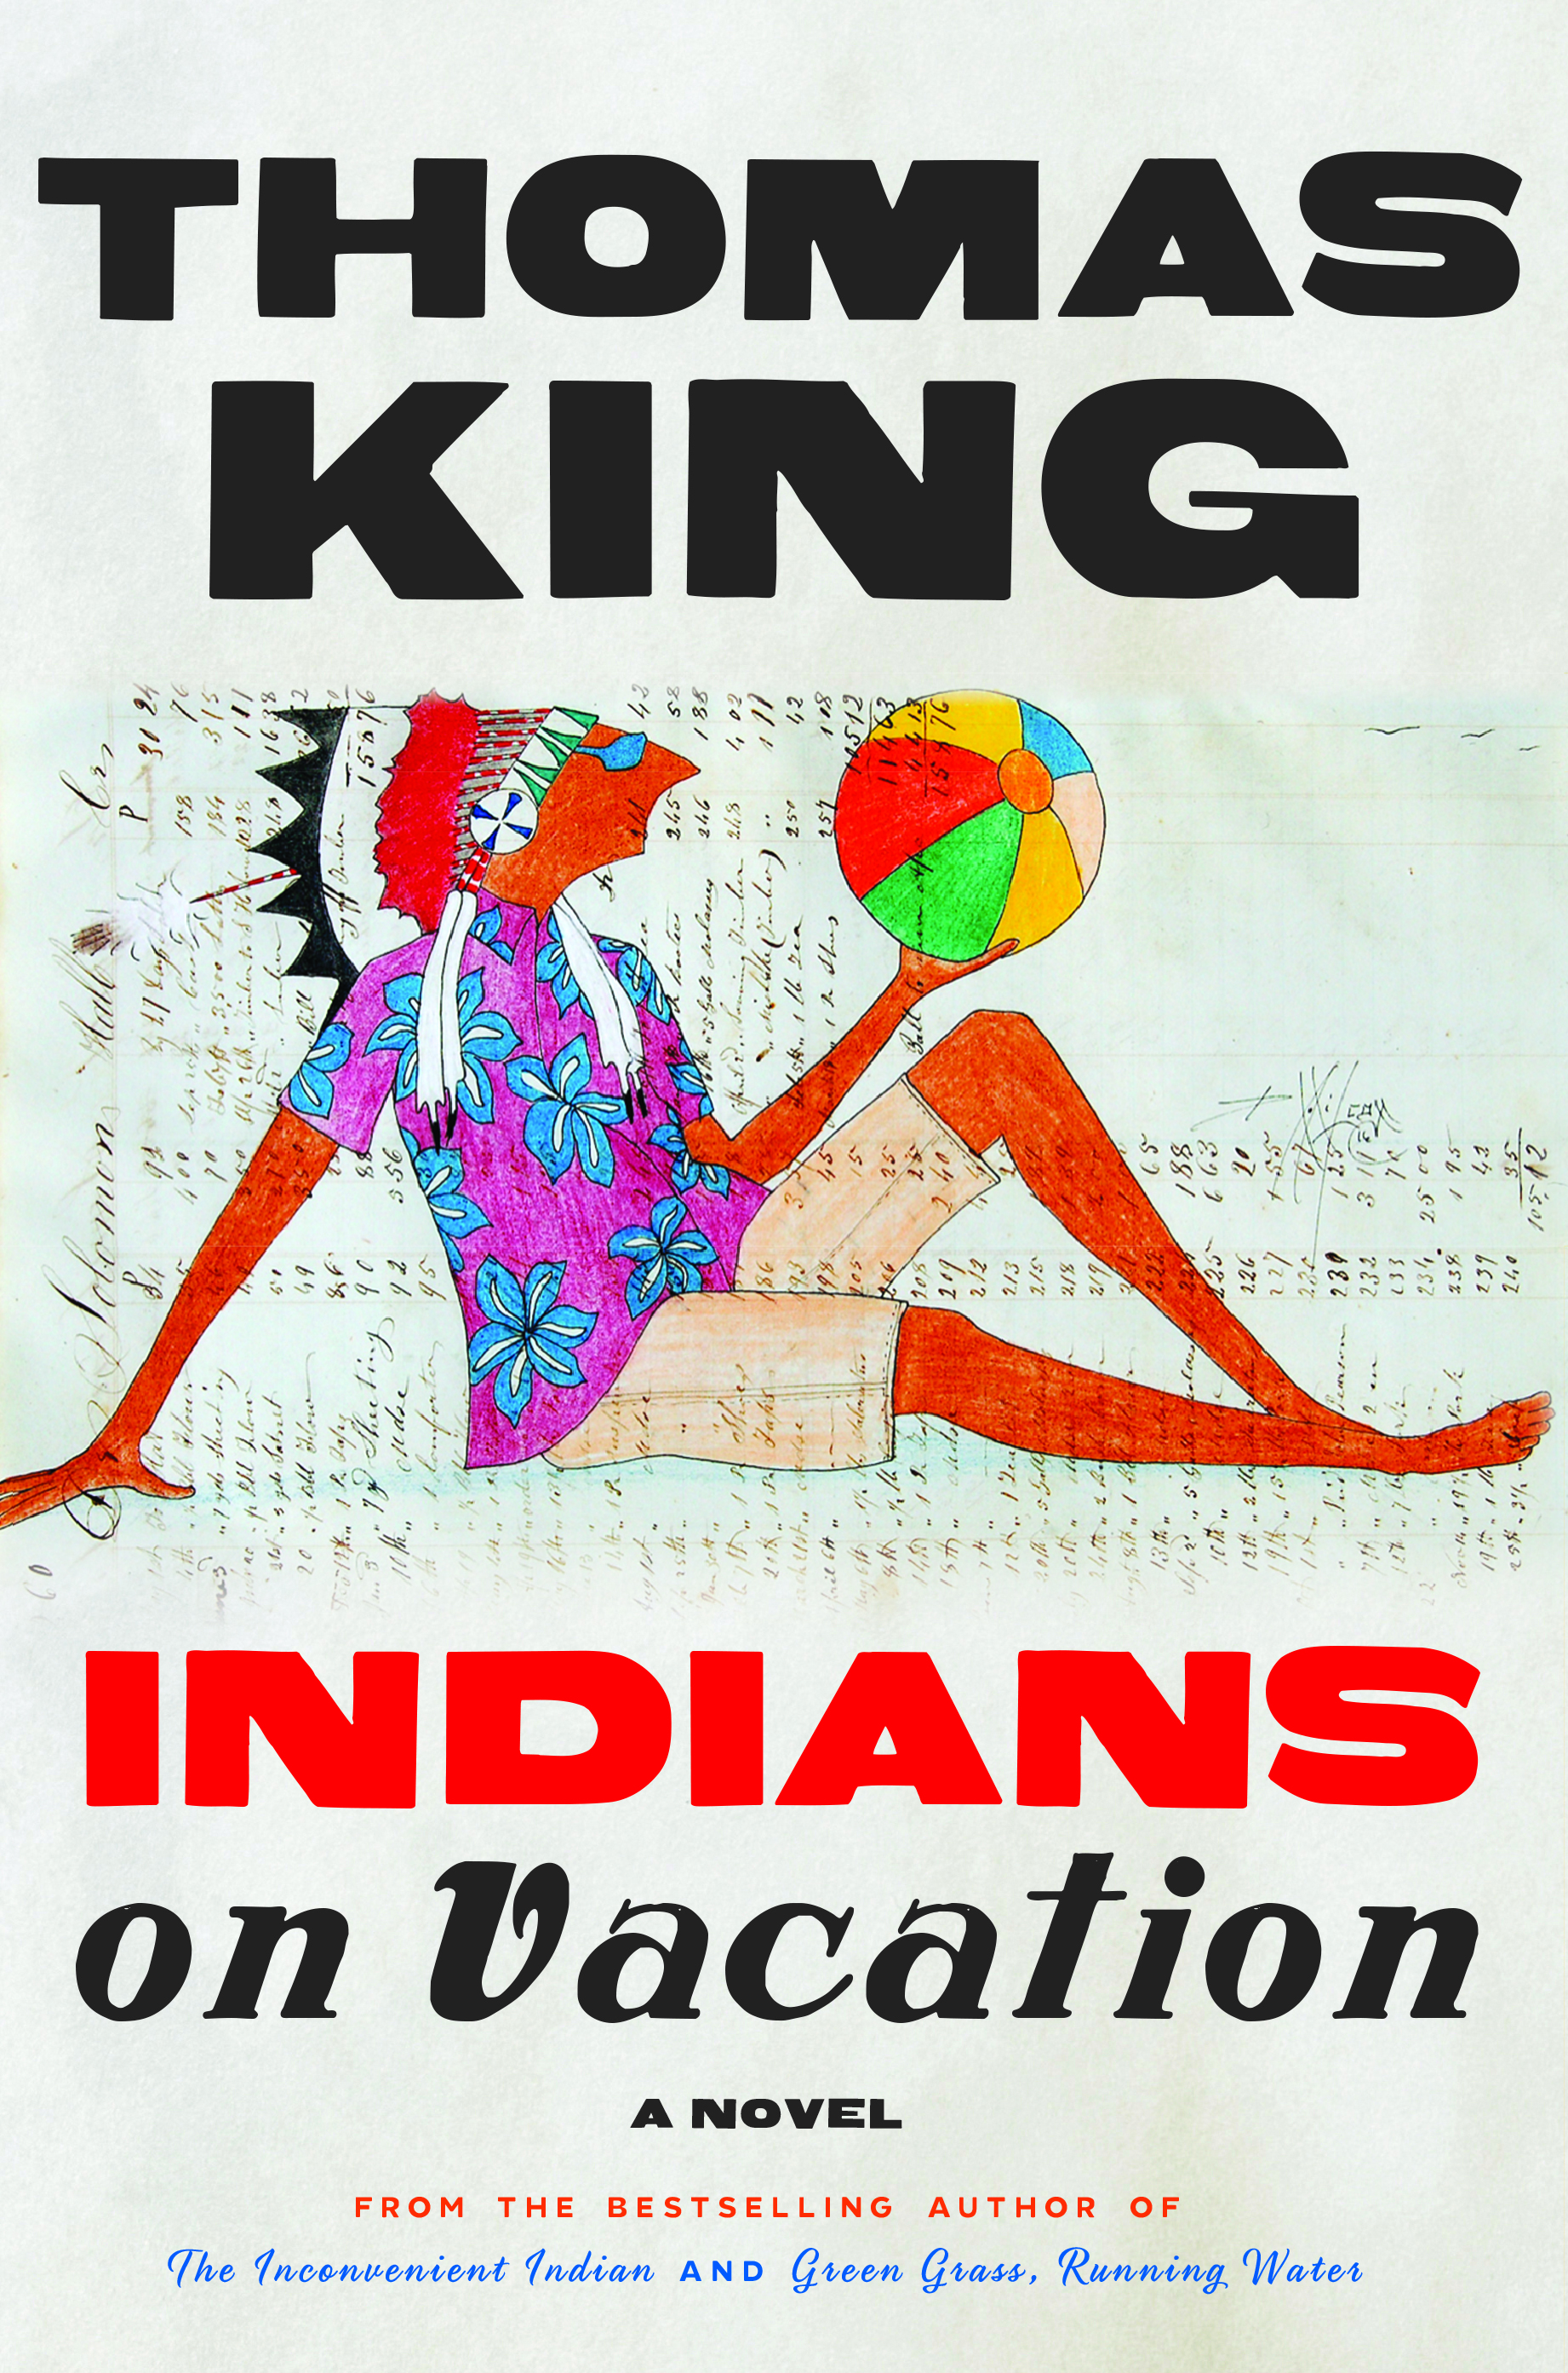 The cover of "Indians On Vacation."